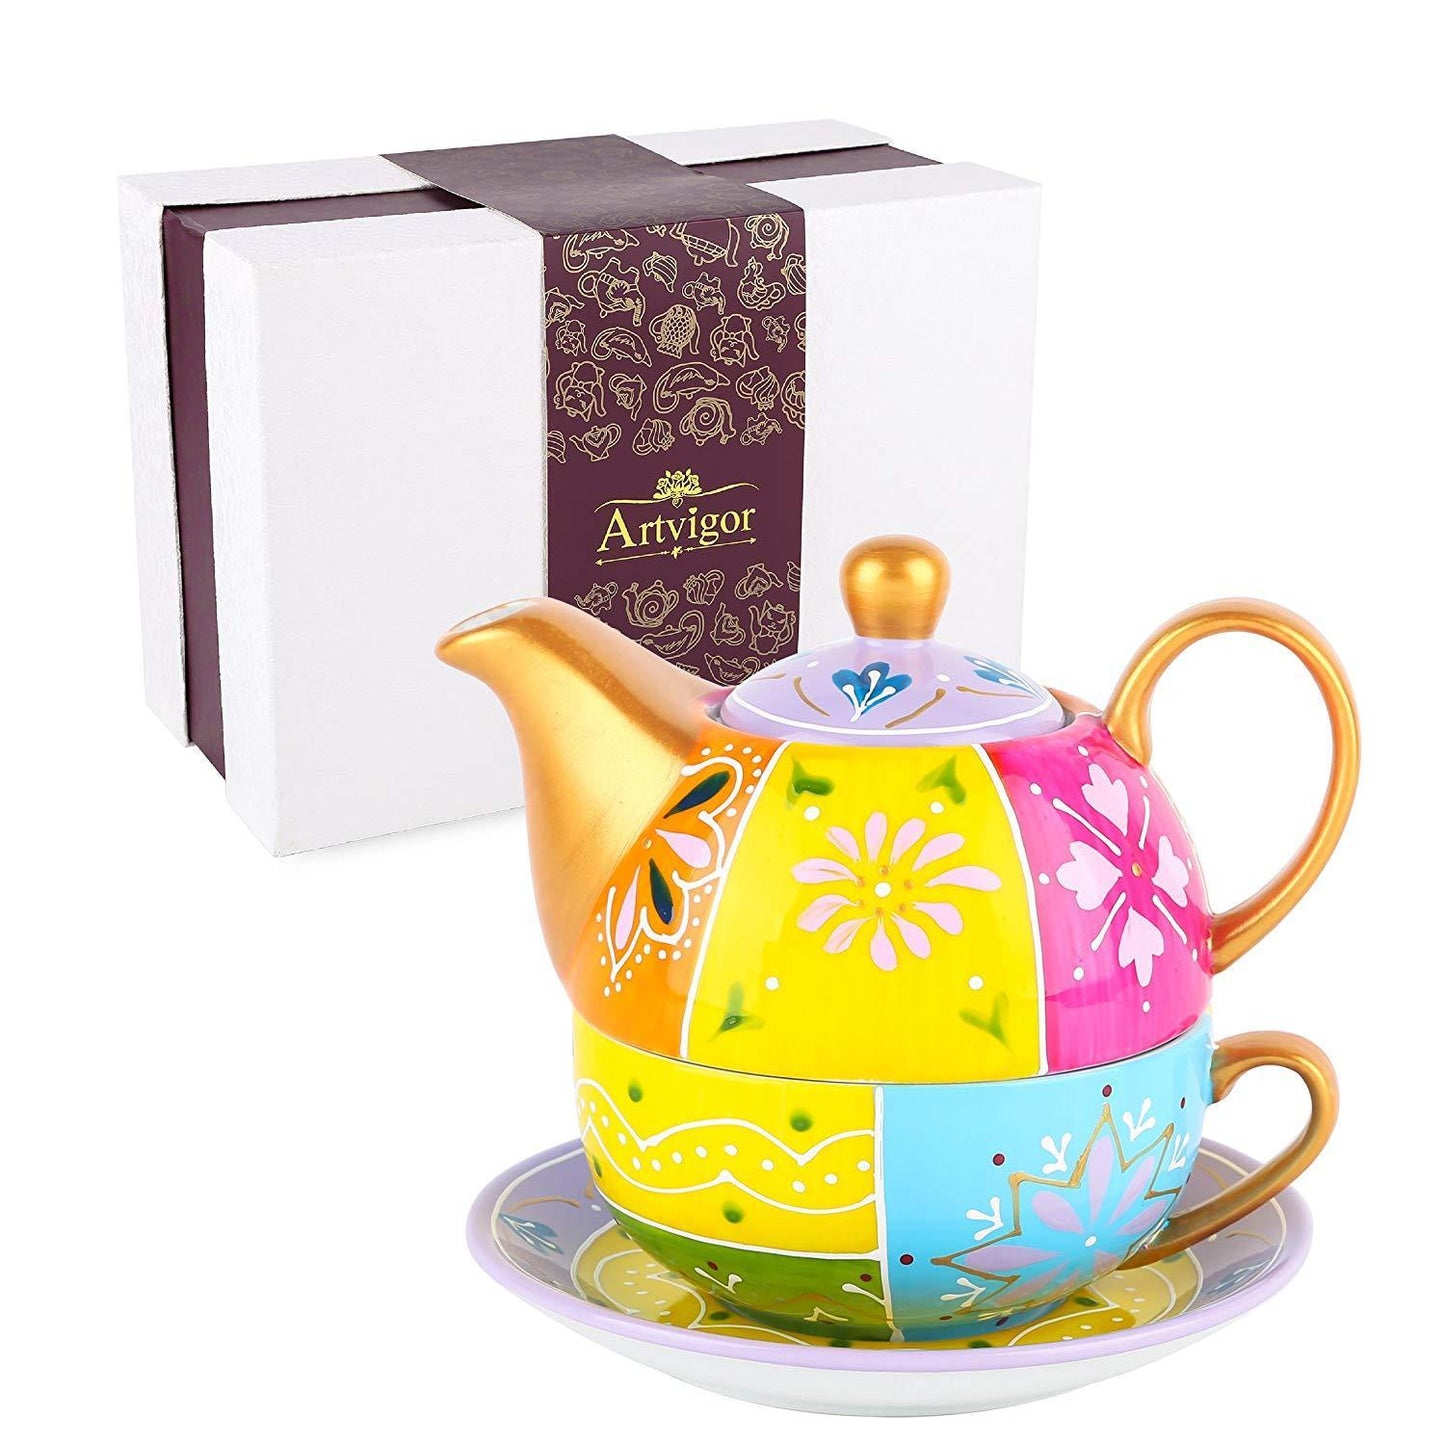 Portable Travel Tea Set for One with One Teapot,Cup and Saucer Stackable Porcelain Family Office Personal Teaware Set - Nordic Side - and, ARTVIGOR, Family, for, Office, One, Personal, Porcel